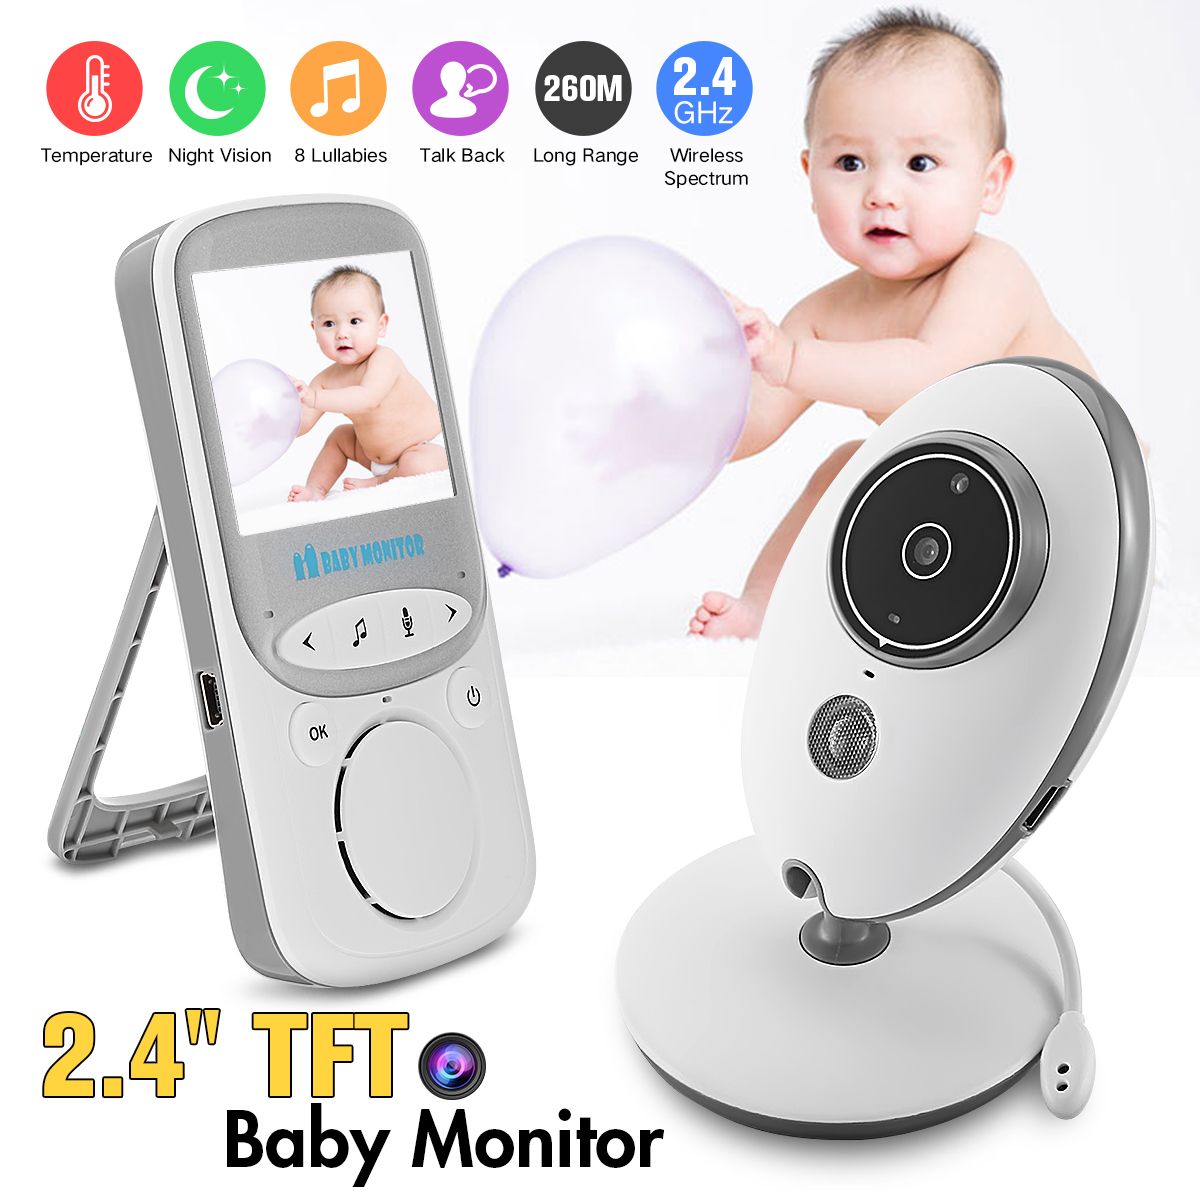 Wireless-Baby-Monitors-24GHz-Color-LCD-Audio-Talk-Night-Vision-Video-Temperature-Music-Player-1275229